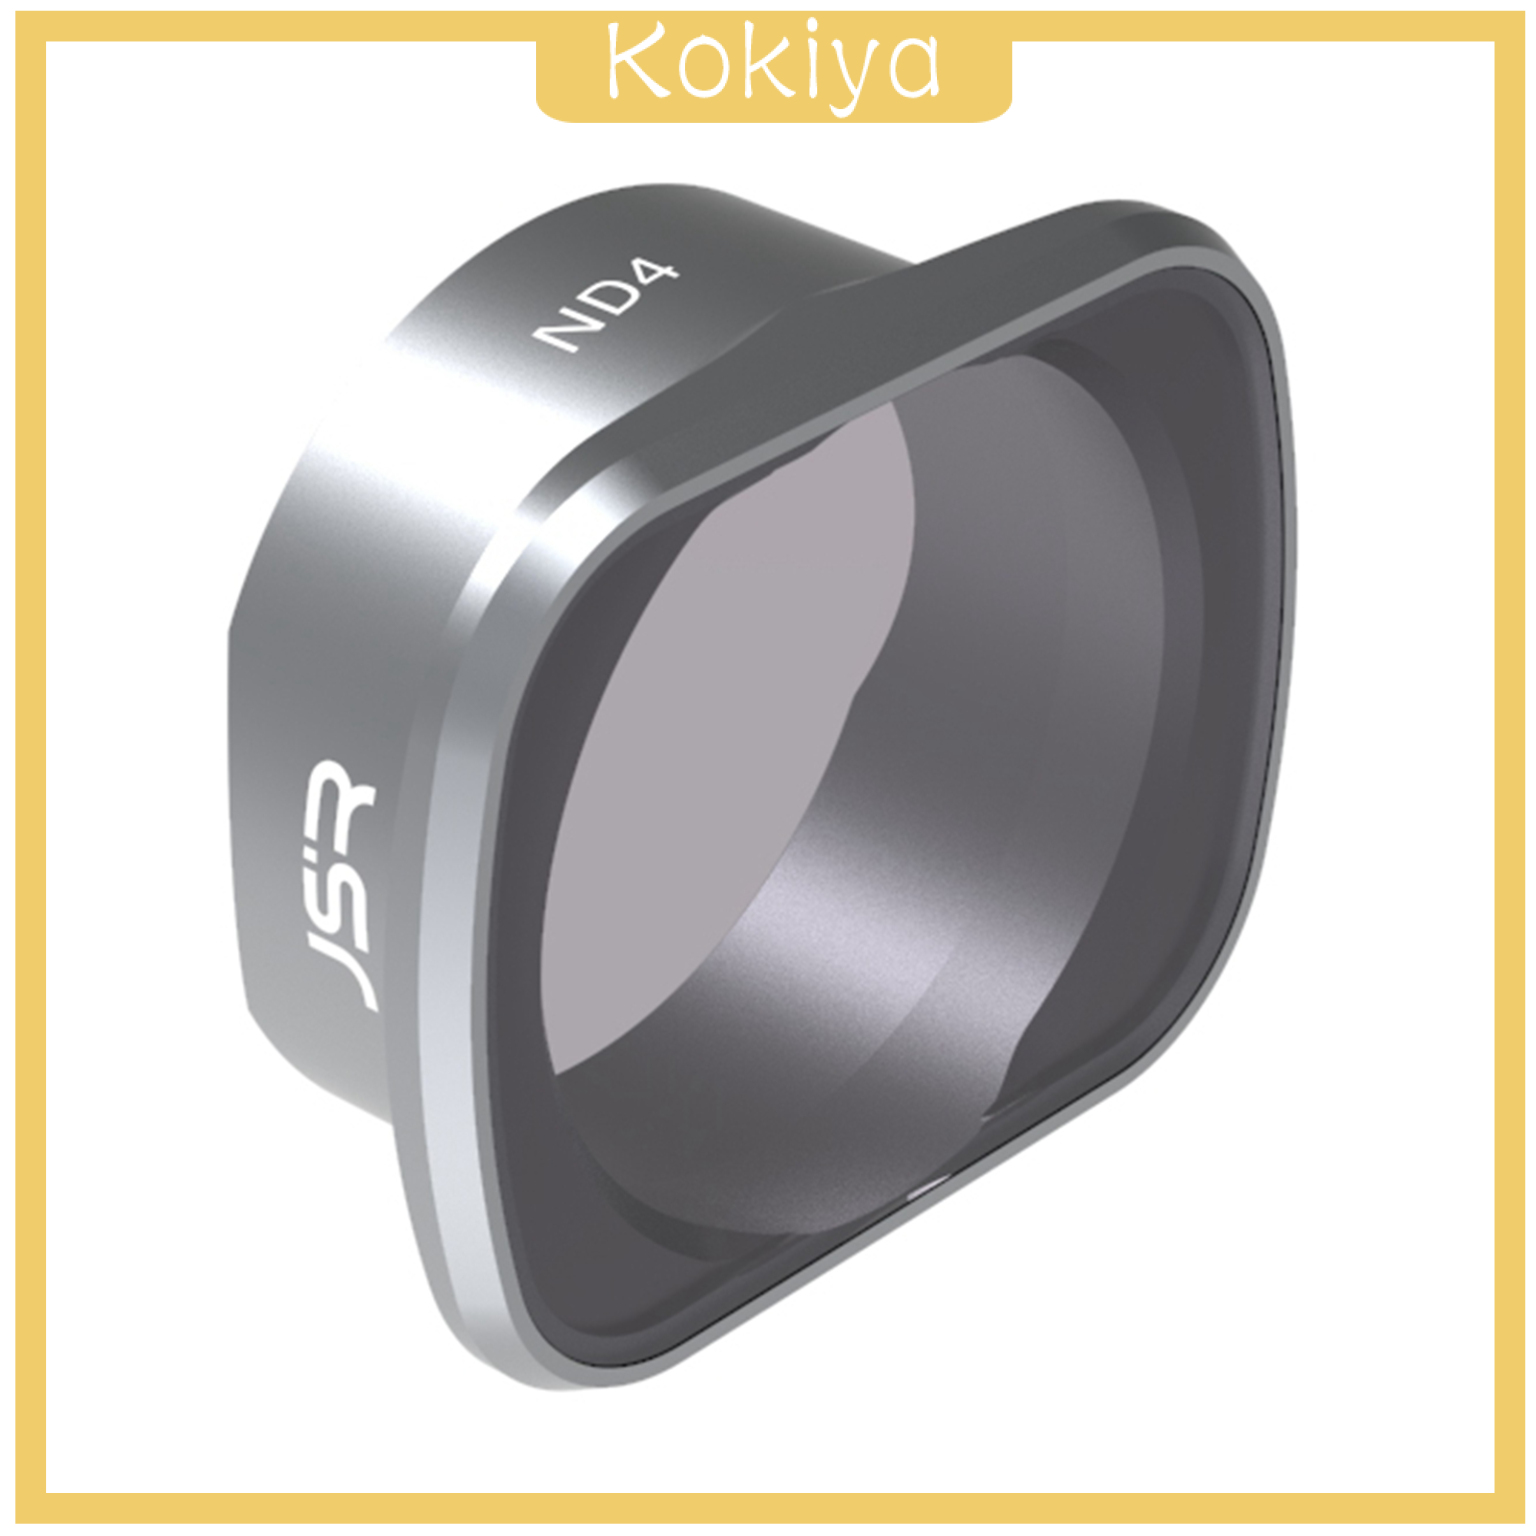 [KOKIYA]High Quality ND4 ND32 Lens Filter for DJI FPV Combo Drone Accessories